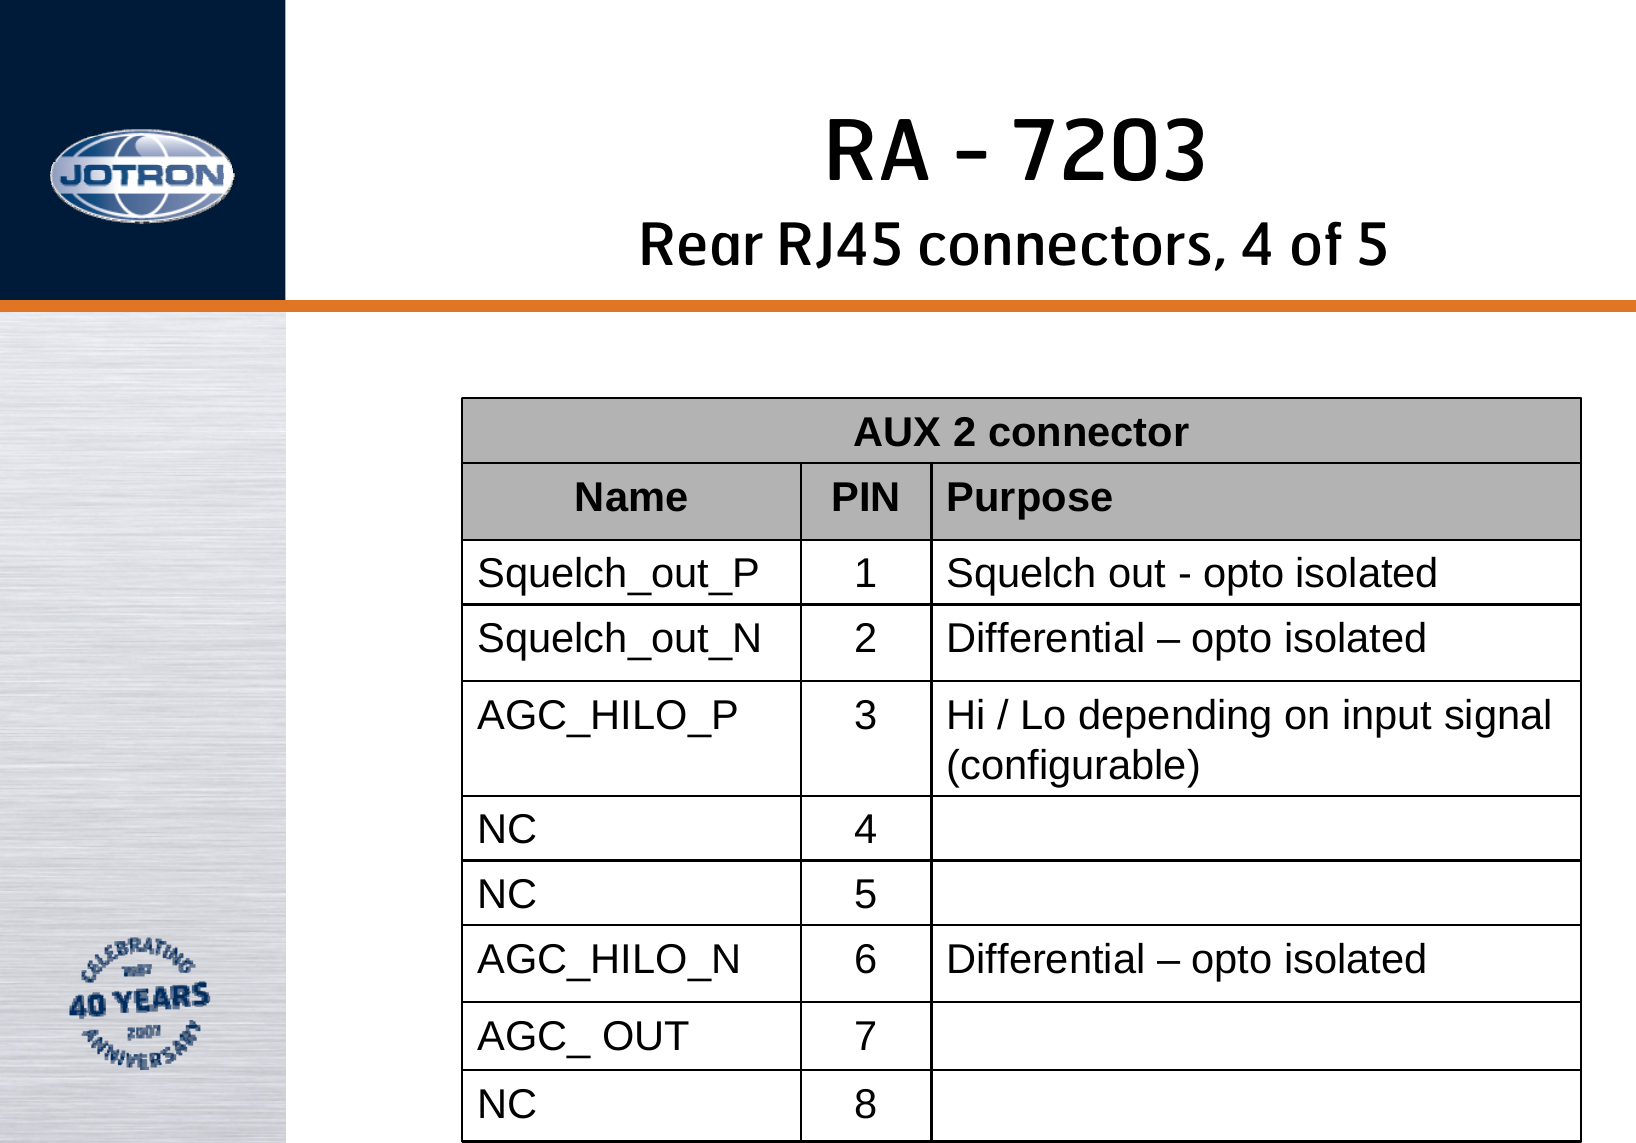 RA - 7203AUX 2 connectorName PIN PurposeSquelch_out_P 1Squelch out - opto isolatedSquelch_out_N 2Differential – opto isolatedAGC_HILO_P 3Hi / Lo depending on input signal(configurable) NC 4NC 5AGC_HILO_N 6Differential – opto isolatedAGC_ OUT 7NC 8Rear RJ45 connectors, 4 of 5